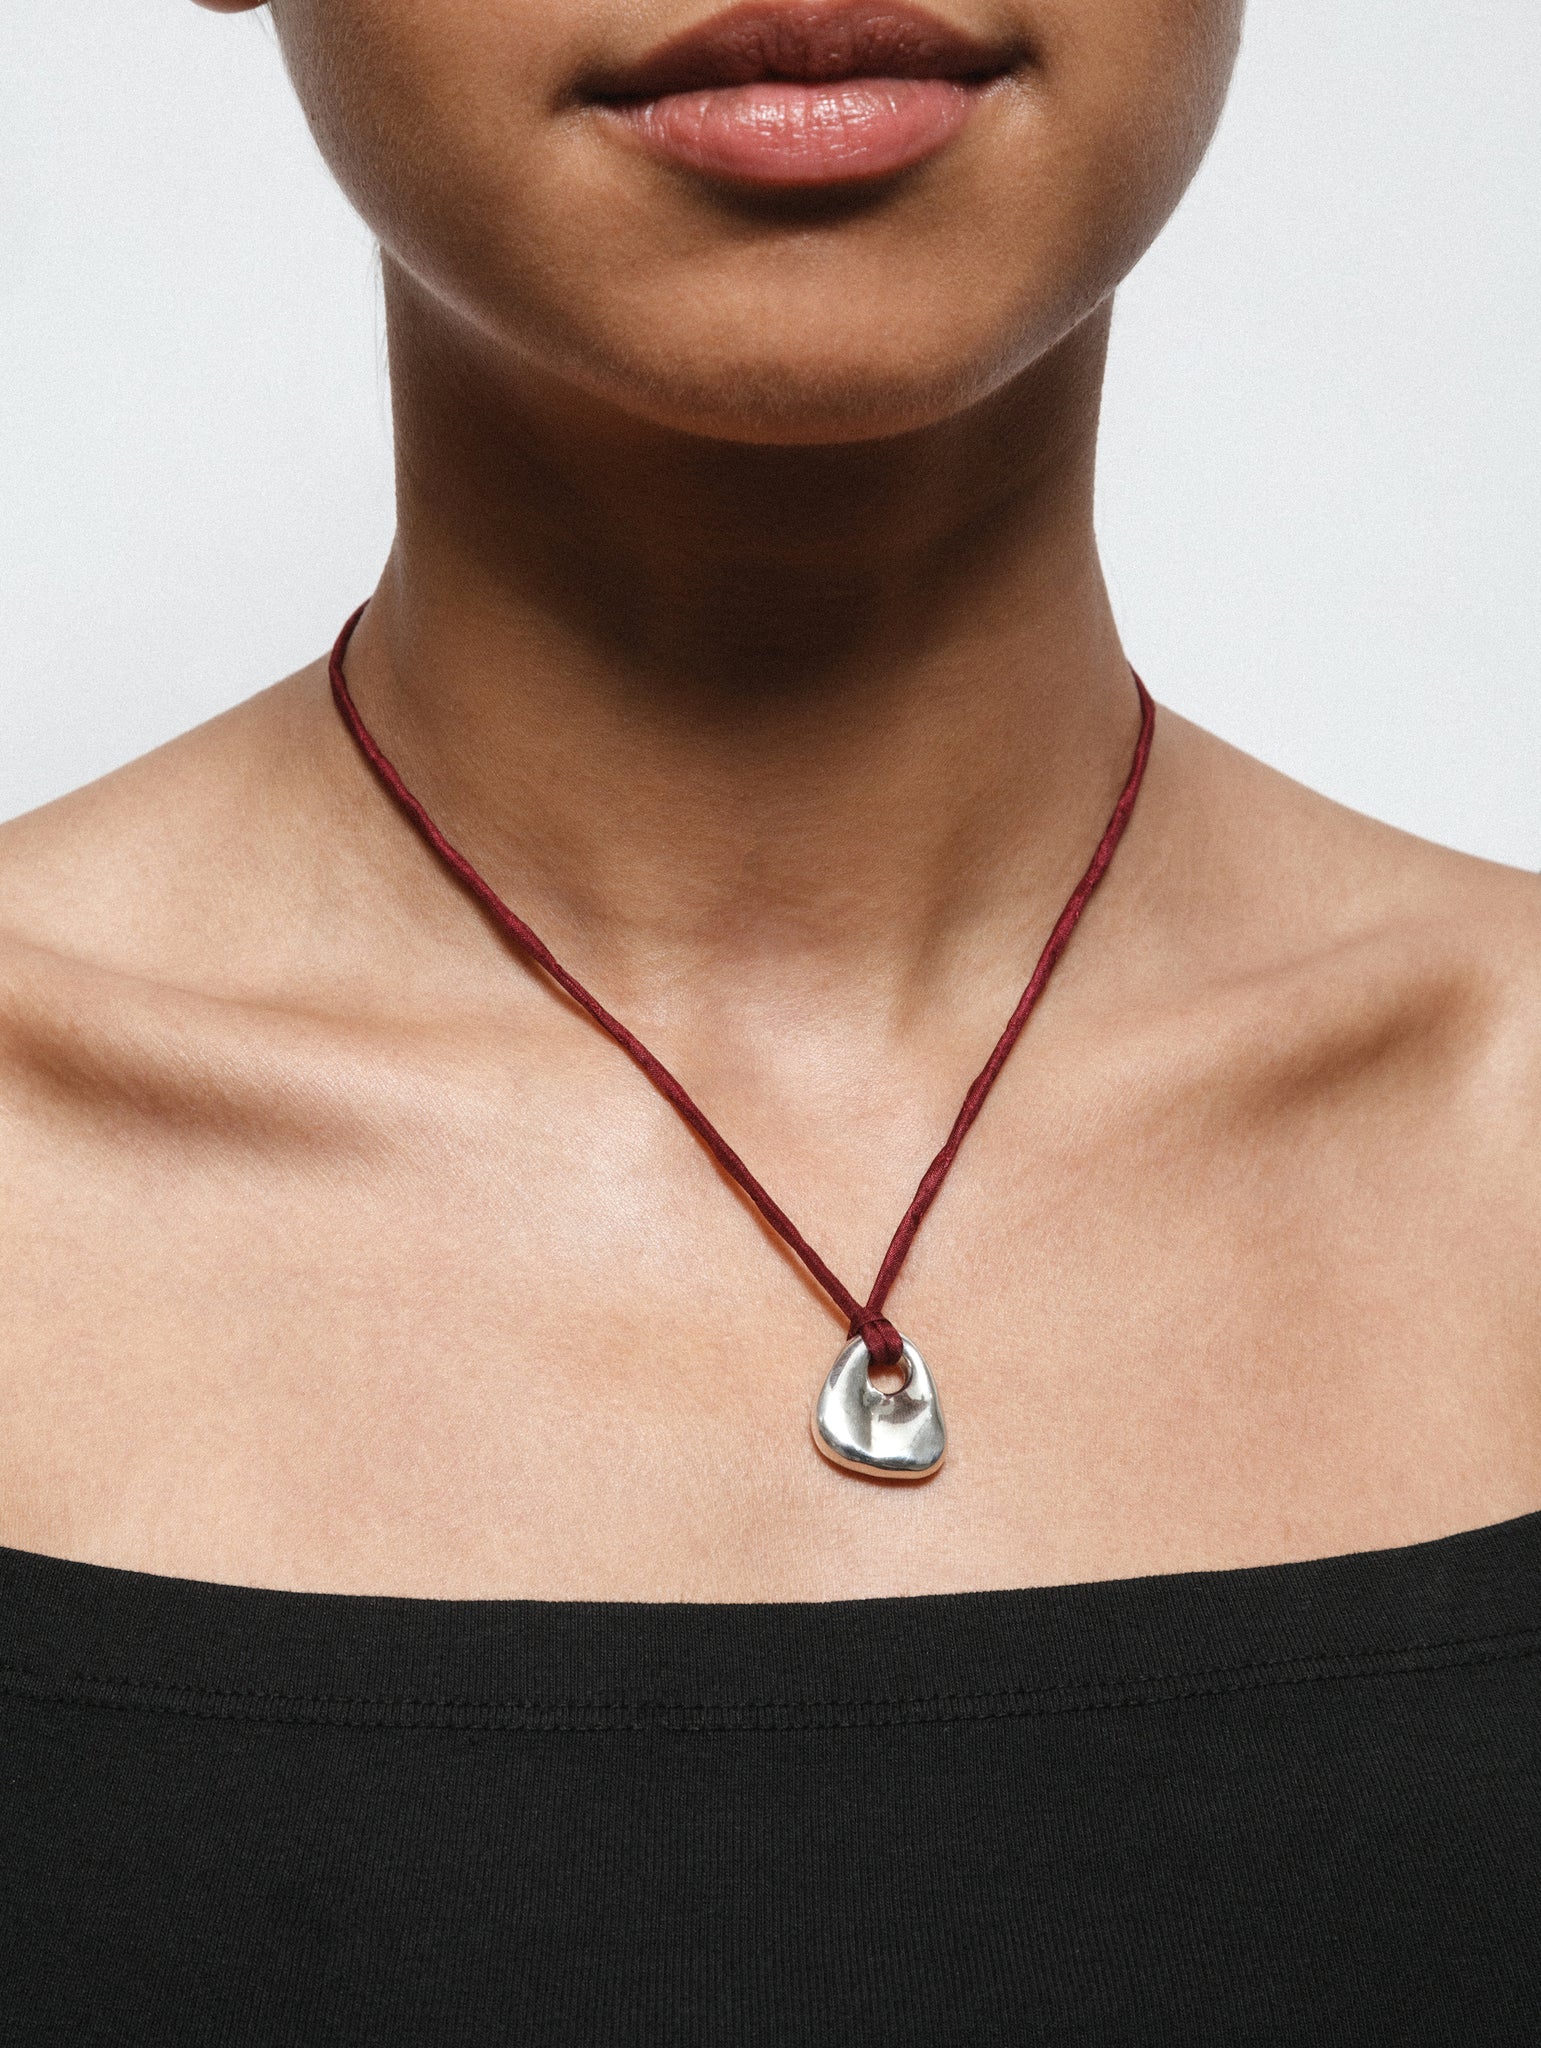 Wolf Circus Cord Necklace Choker with Statement Pendant Silver | Dion Necklace in Red-Necklaces-wolfcircus.com